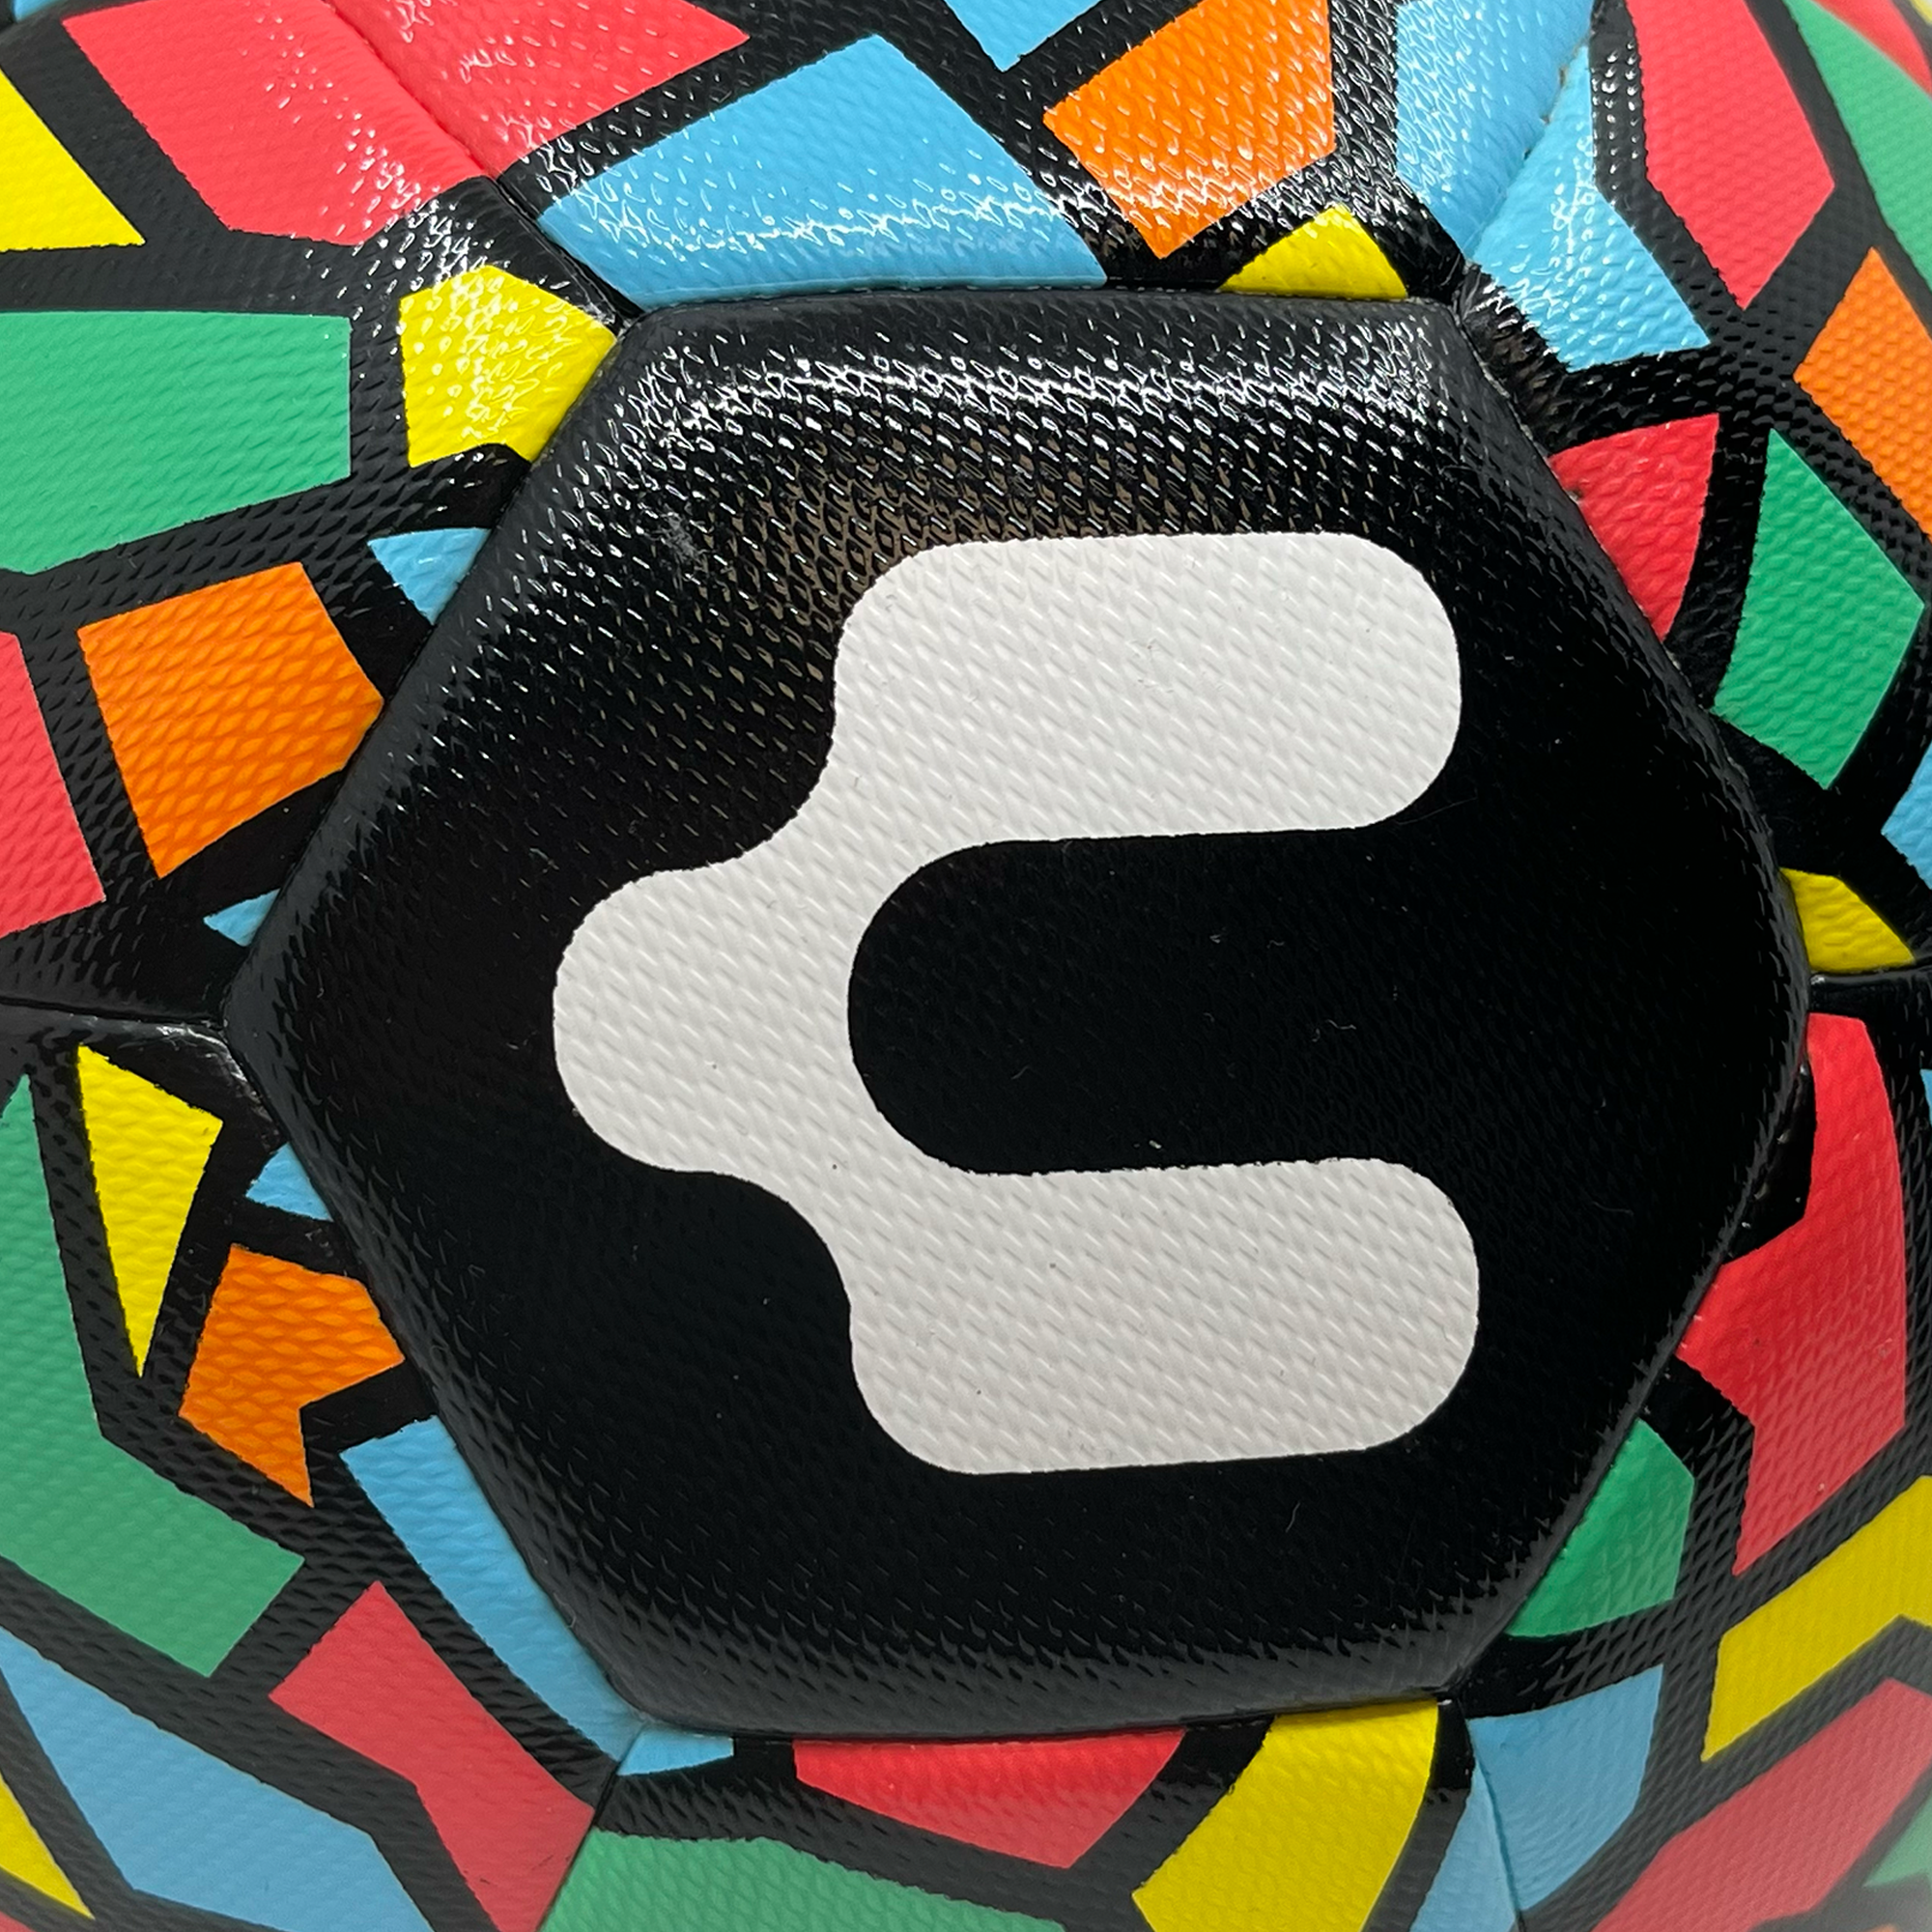 Detail shot of Charly logo on soccerball.